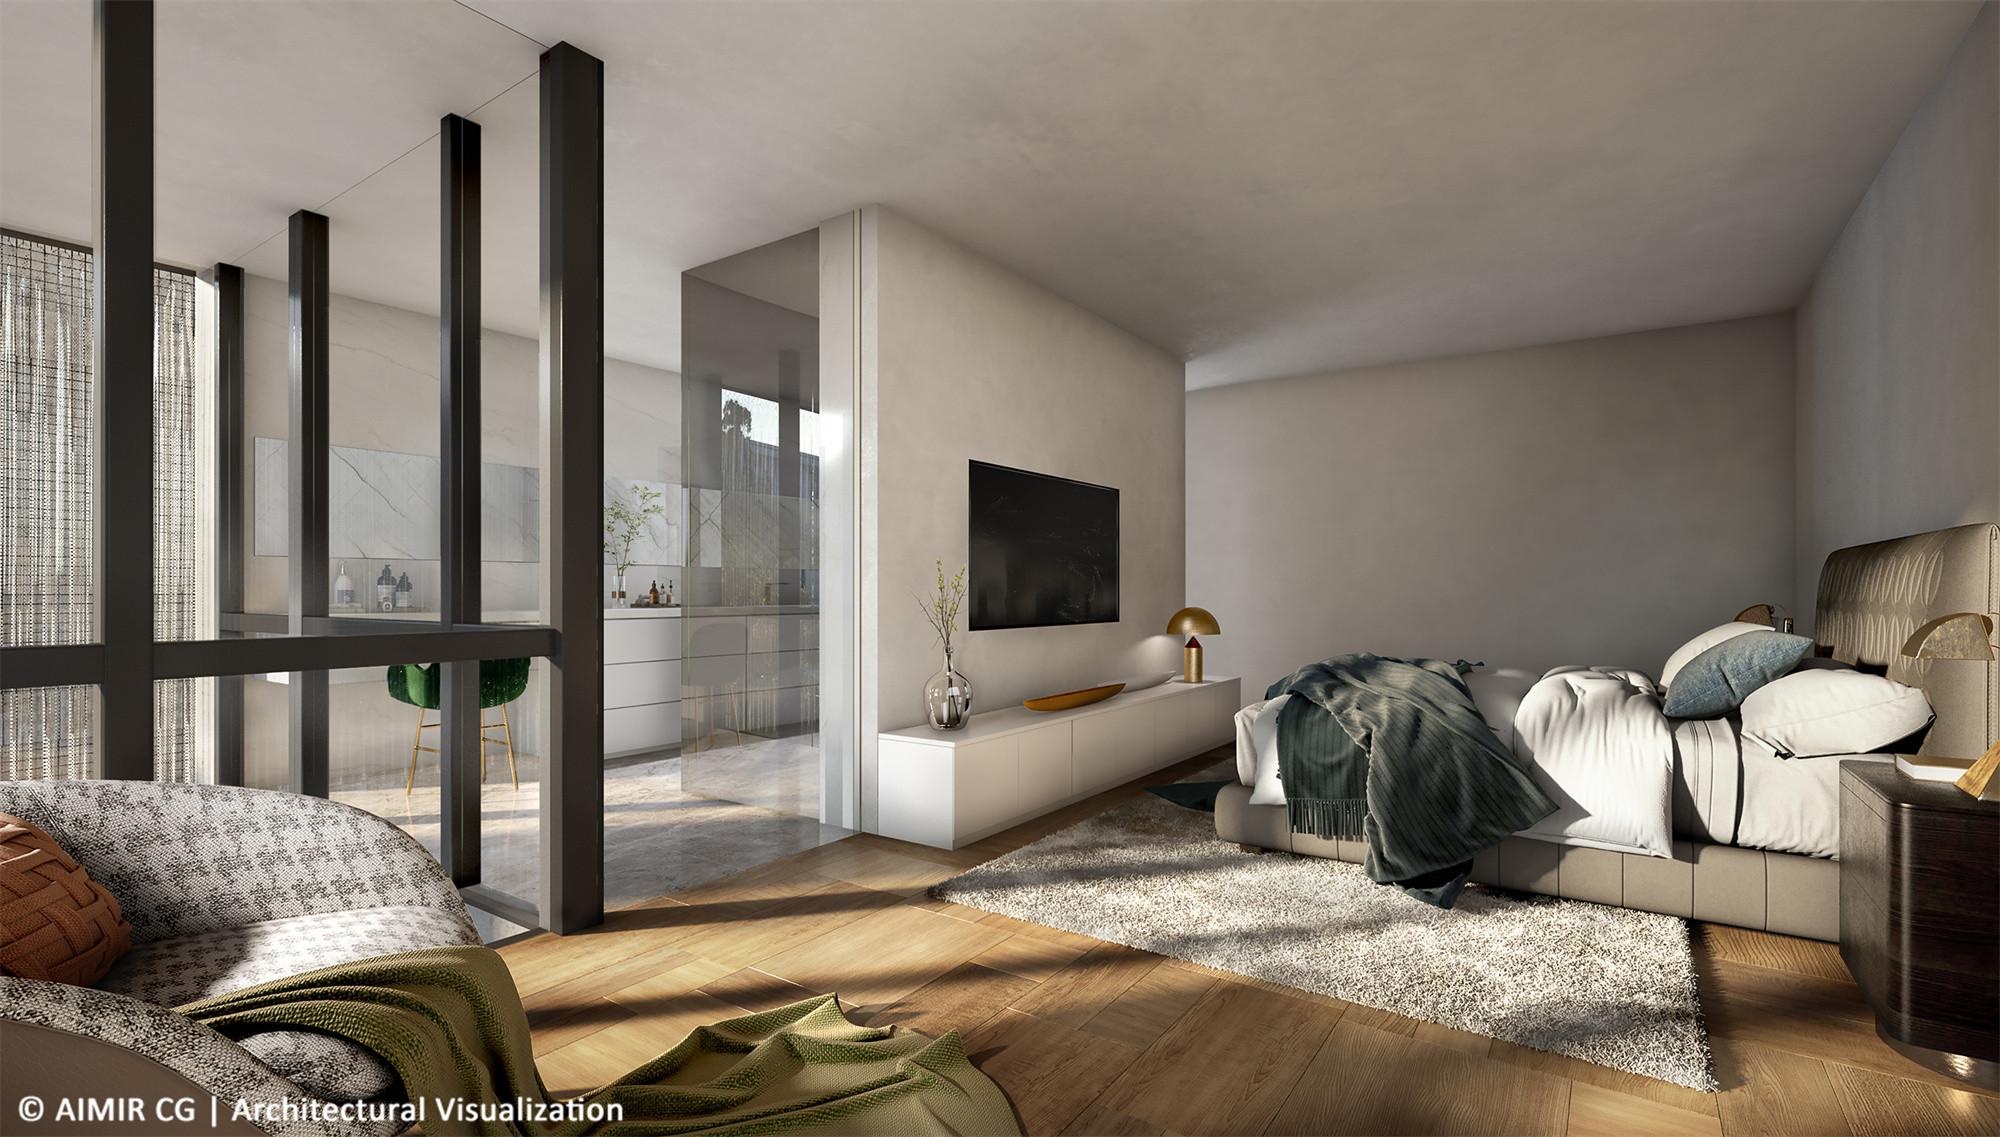 architectural-visualization-3d-rendering-services-interior-cgi-z-residence-tokyo-japan